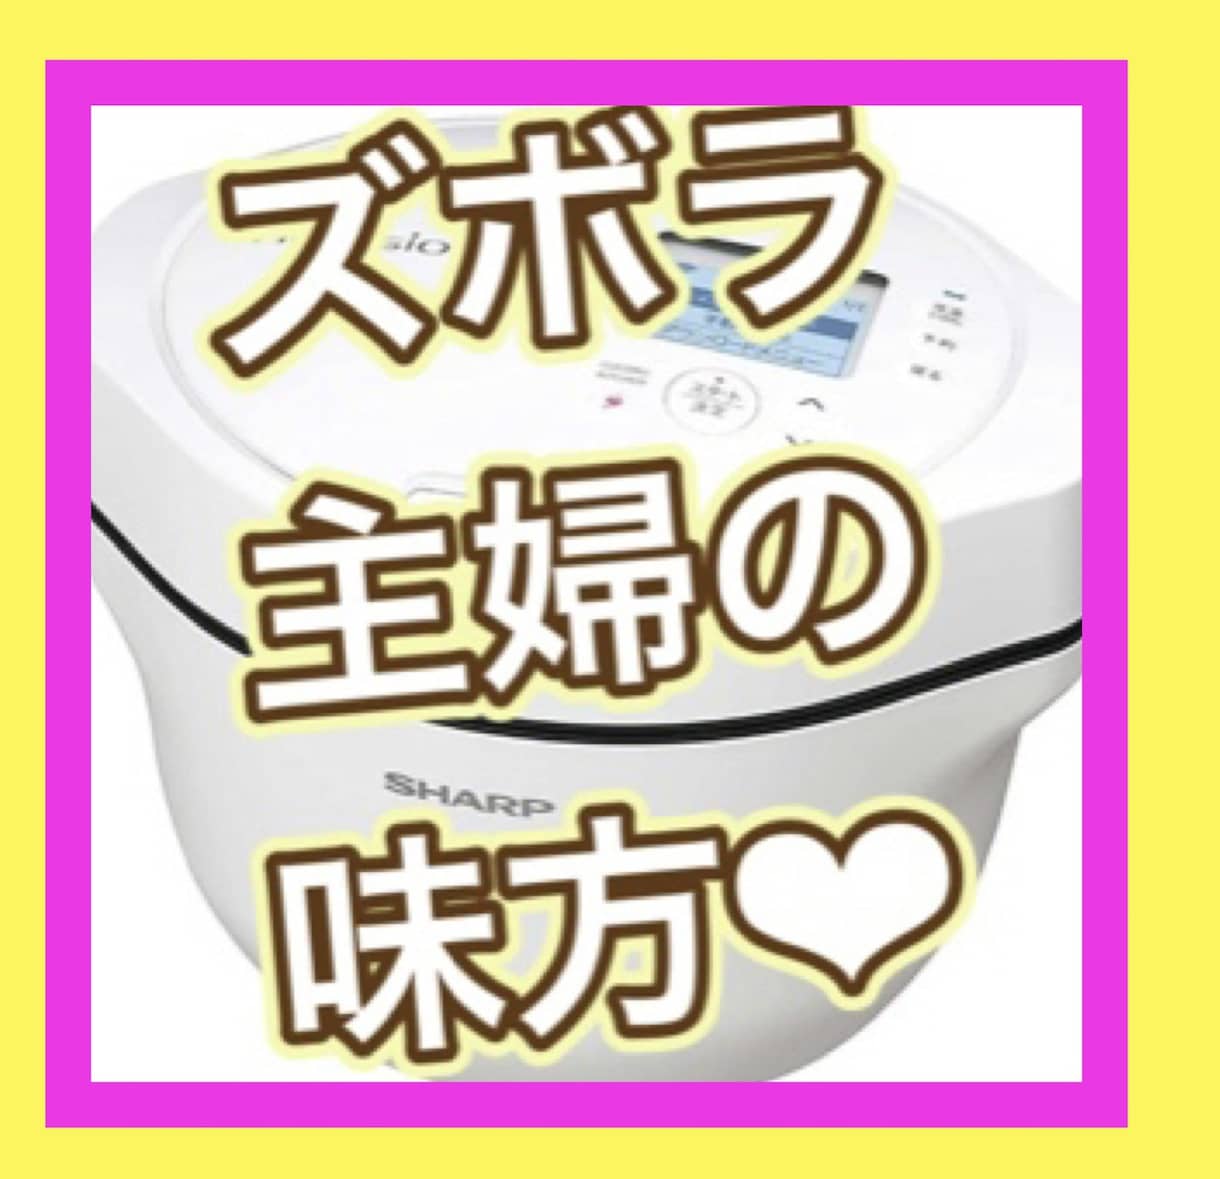 💬Coconala｜I will teach you how to cook a versatile hot cook using home appliances that saves time ︎Utako︎ 5.0 (3)…